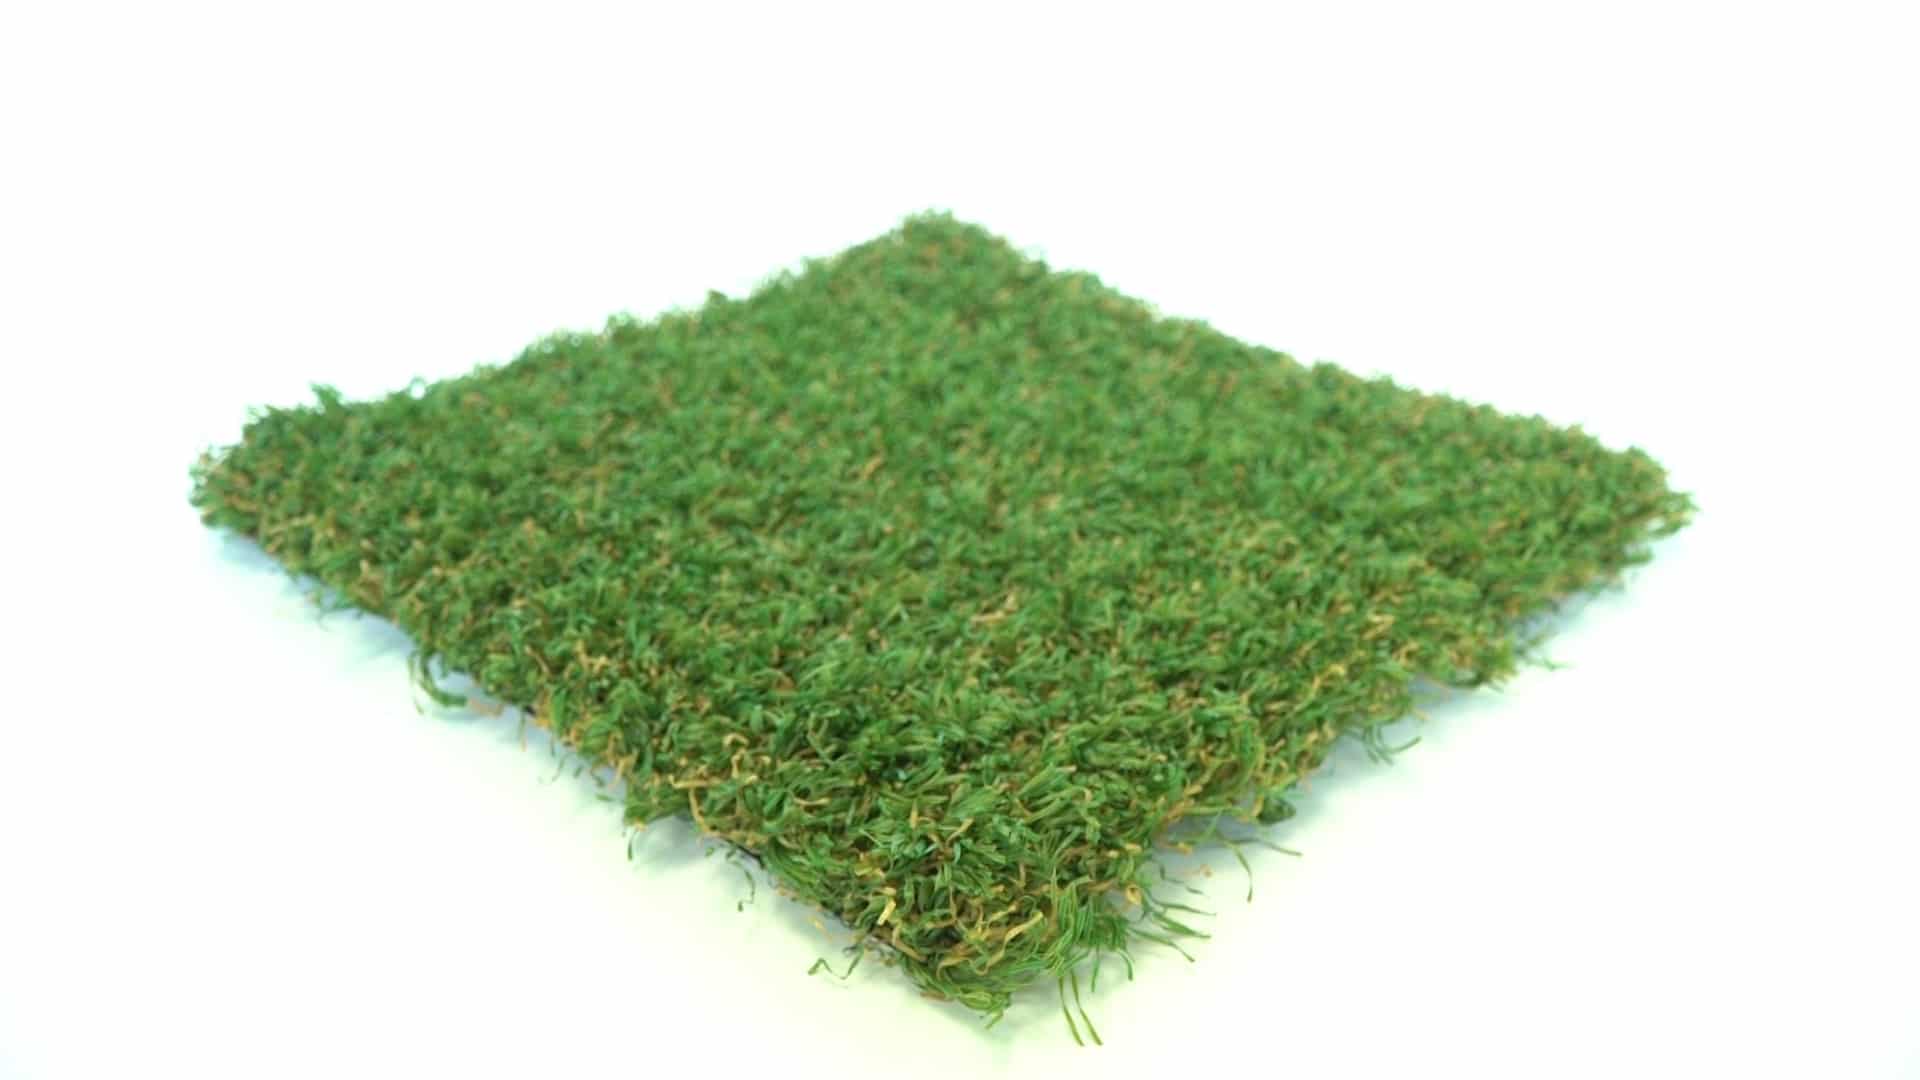 Playscape Pro Playground Grass